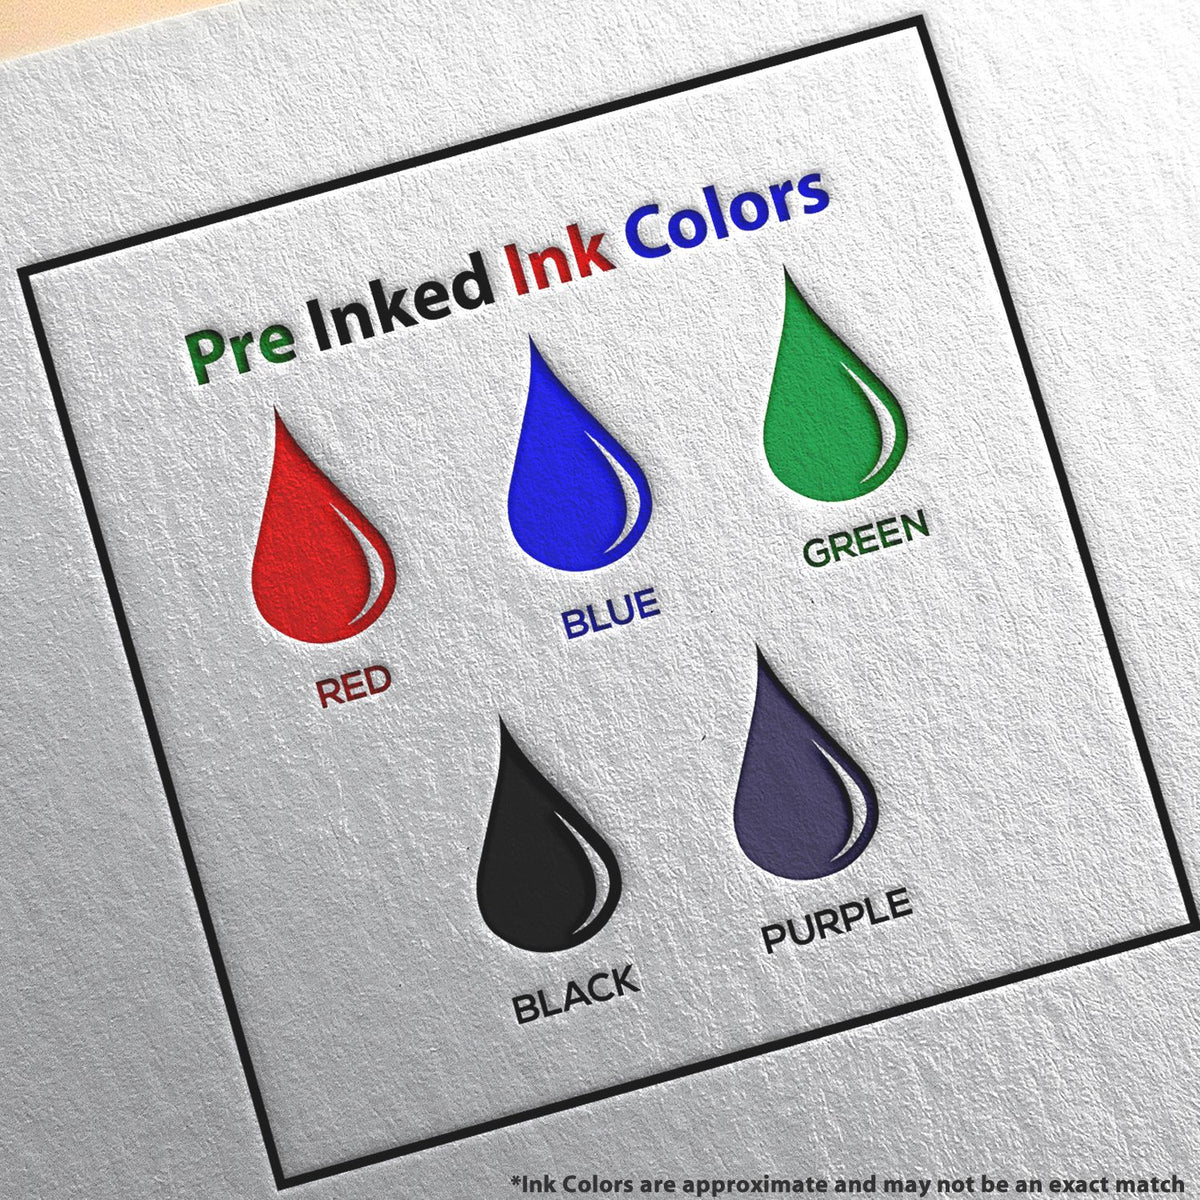 A picture showing the different ink colors or hues available for the Slim Pre-Inked Montana Land Surveyor Seal Stamp product.